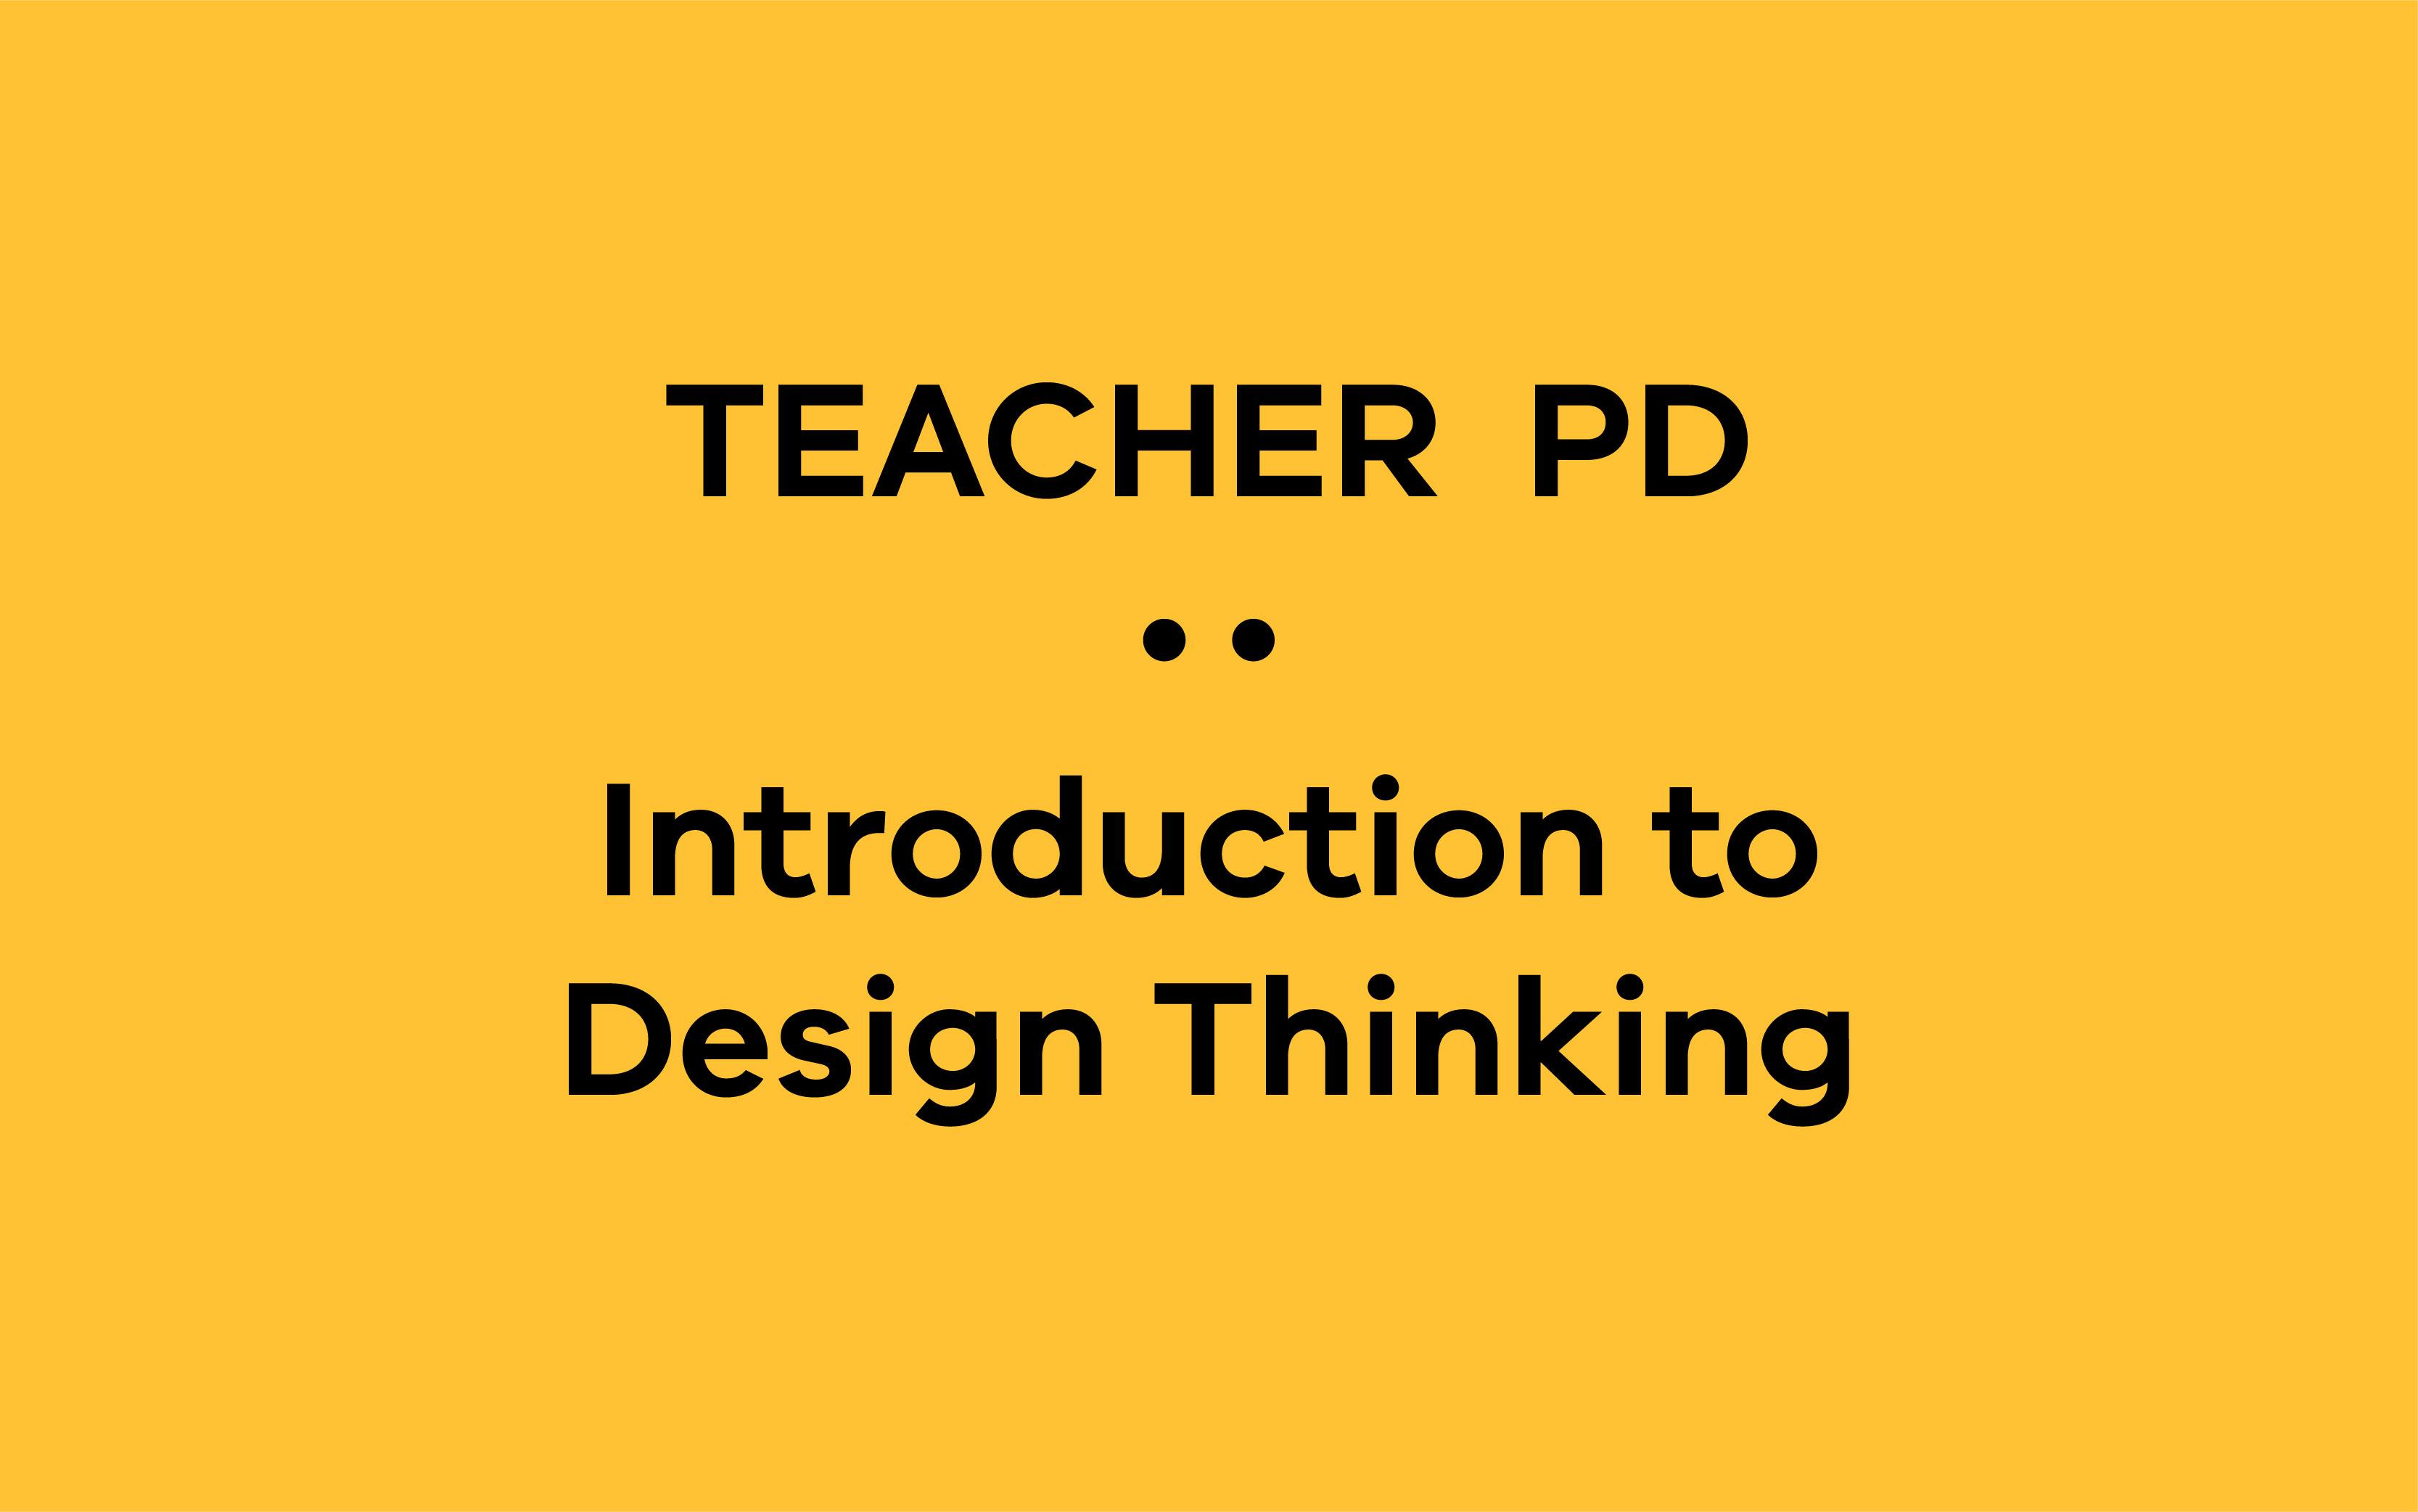 Introduction to Design Thinking for Teachers